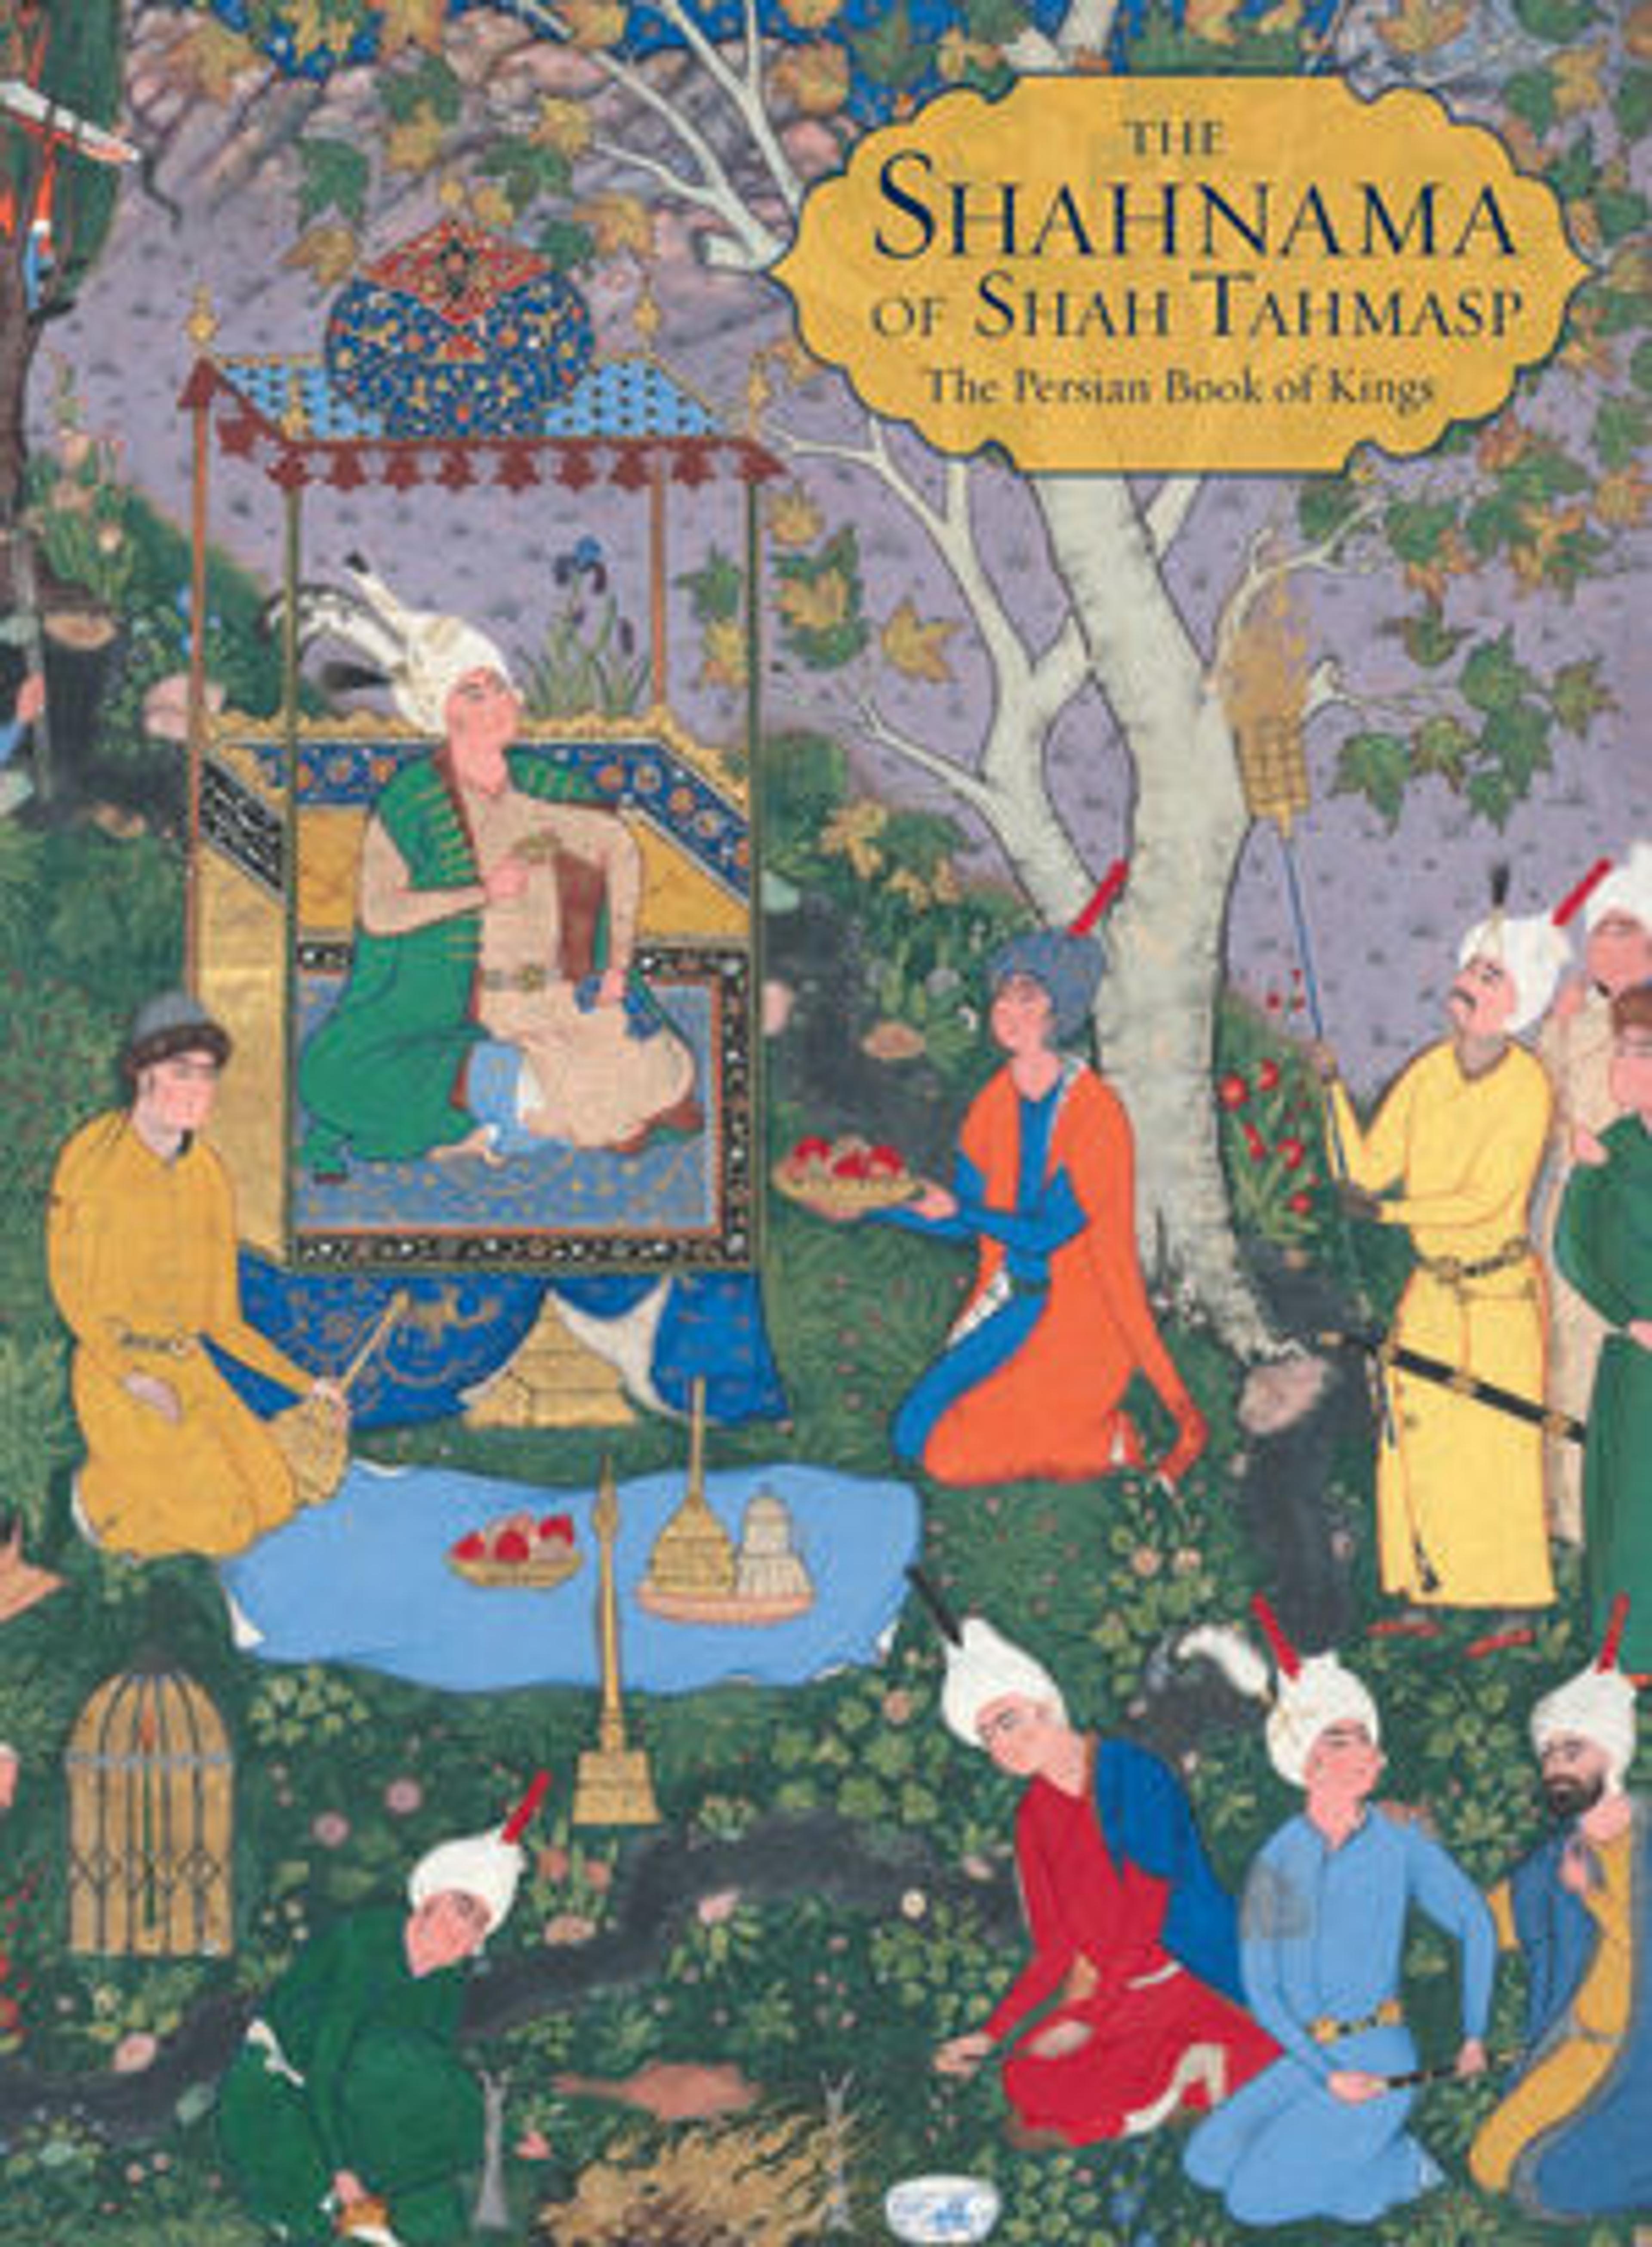 The Shahnama of Shah Tahmasp by Sheila R. Canby